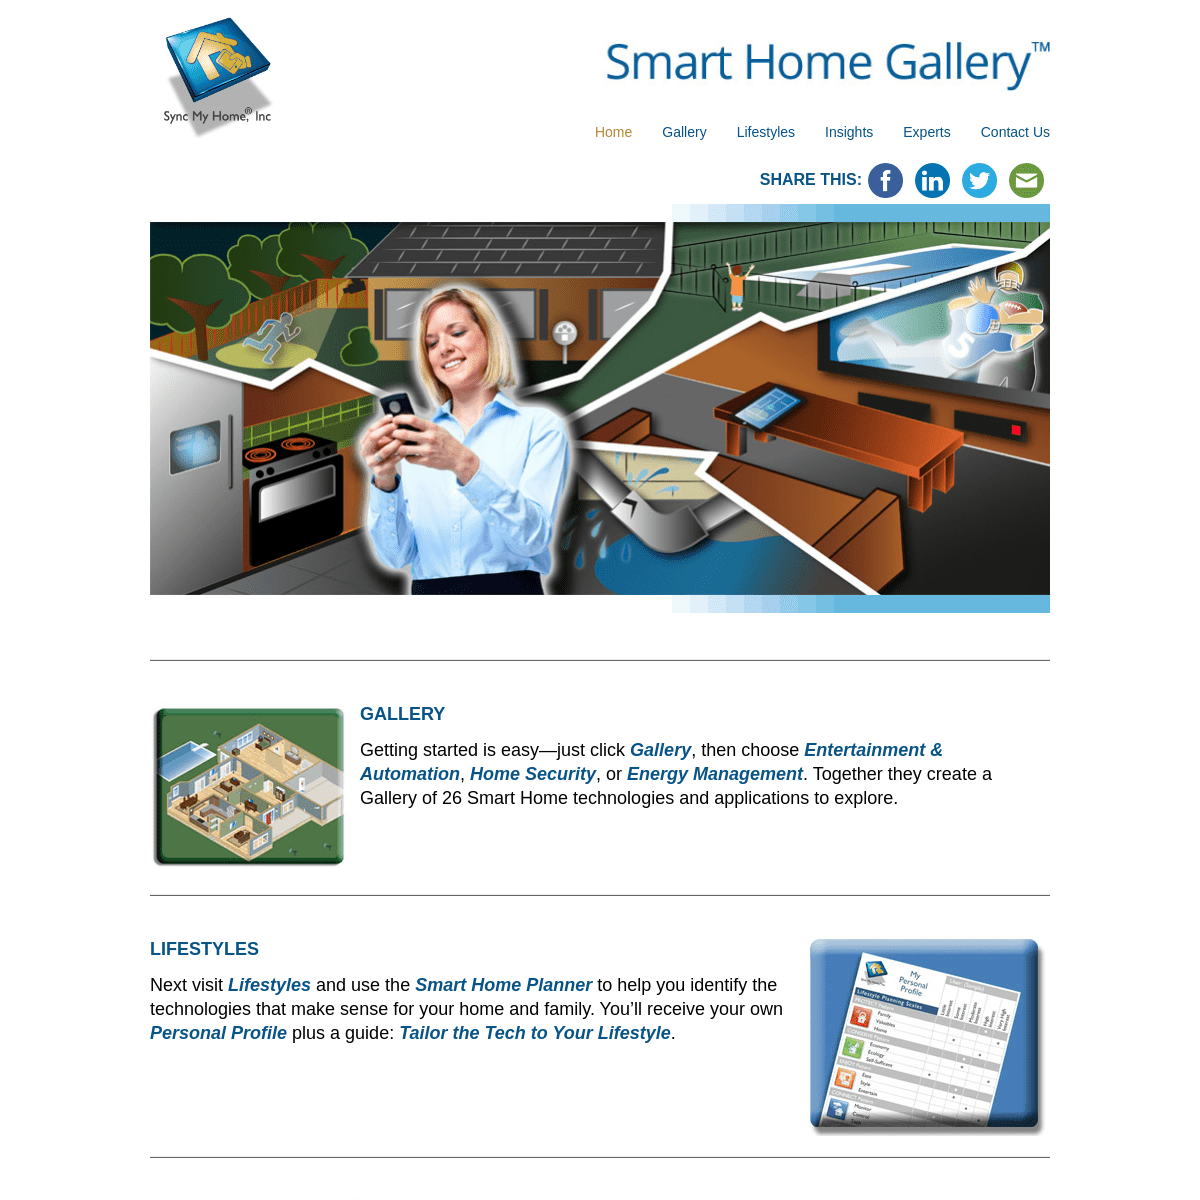 A complete backup of https://smarthomegallery.com